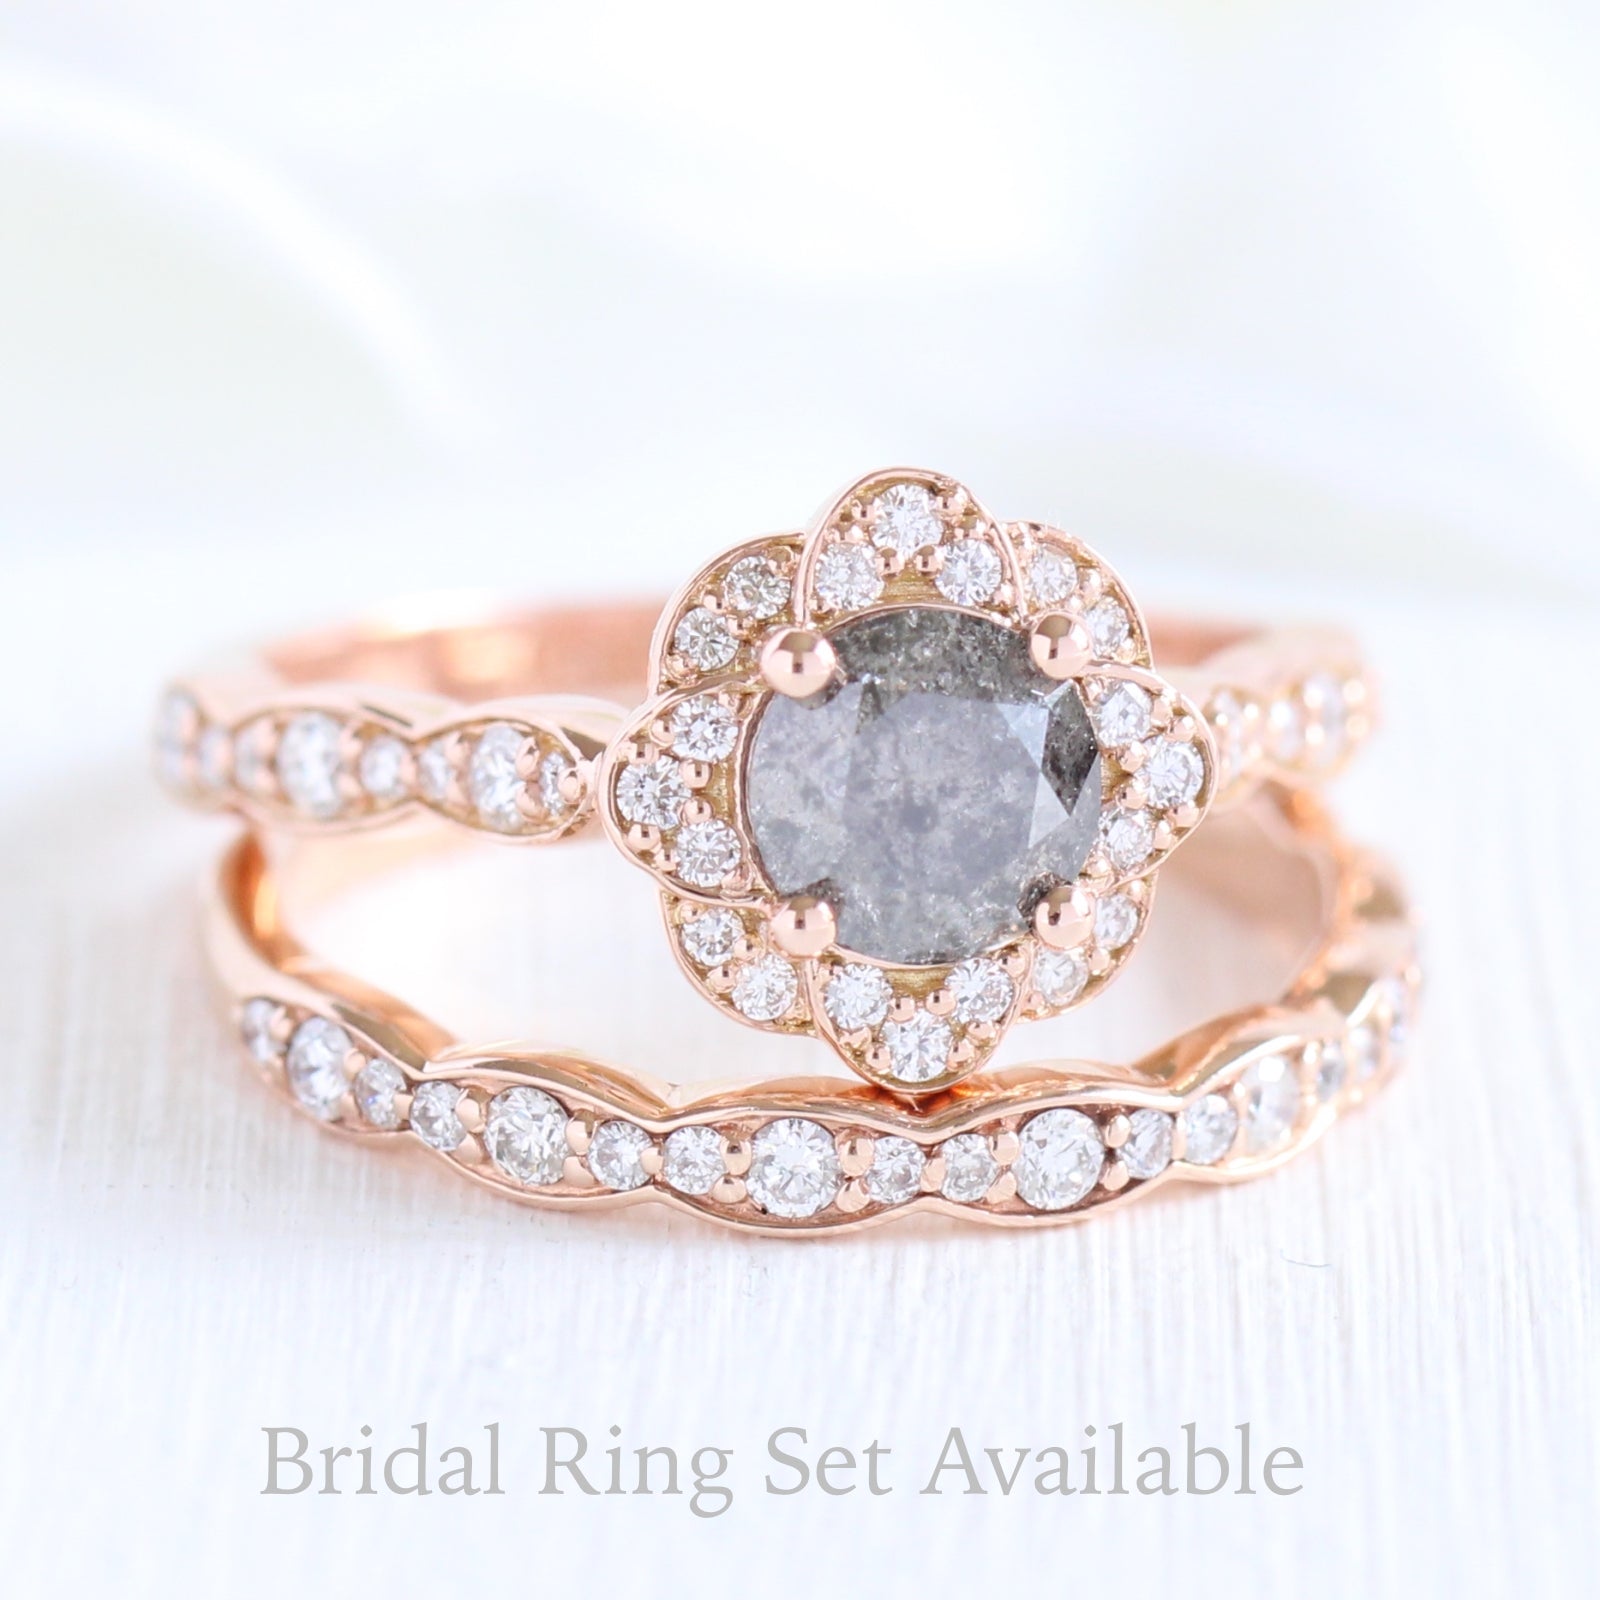 Grey diamond ring and matching diamond wedding band in rose gold vintage floral bridal ring set by la more design jewelry